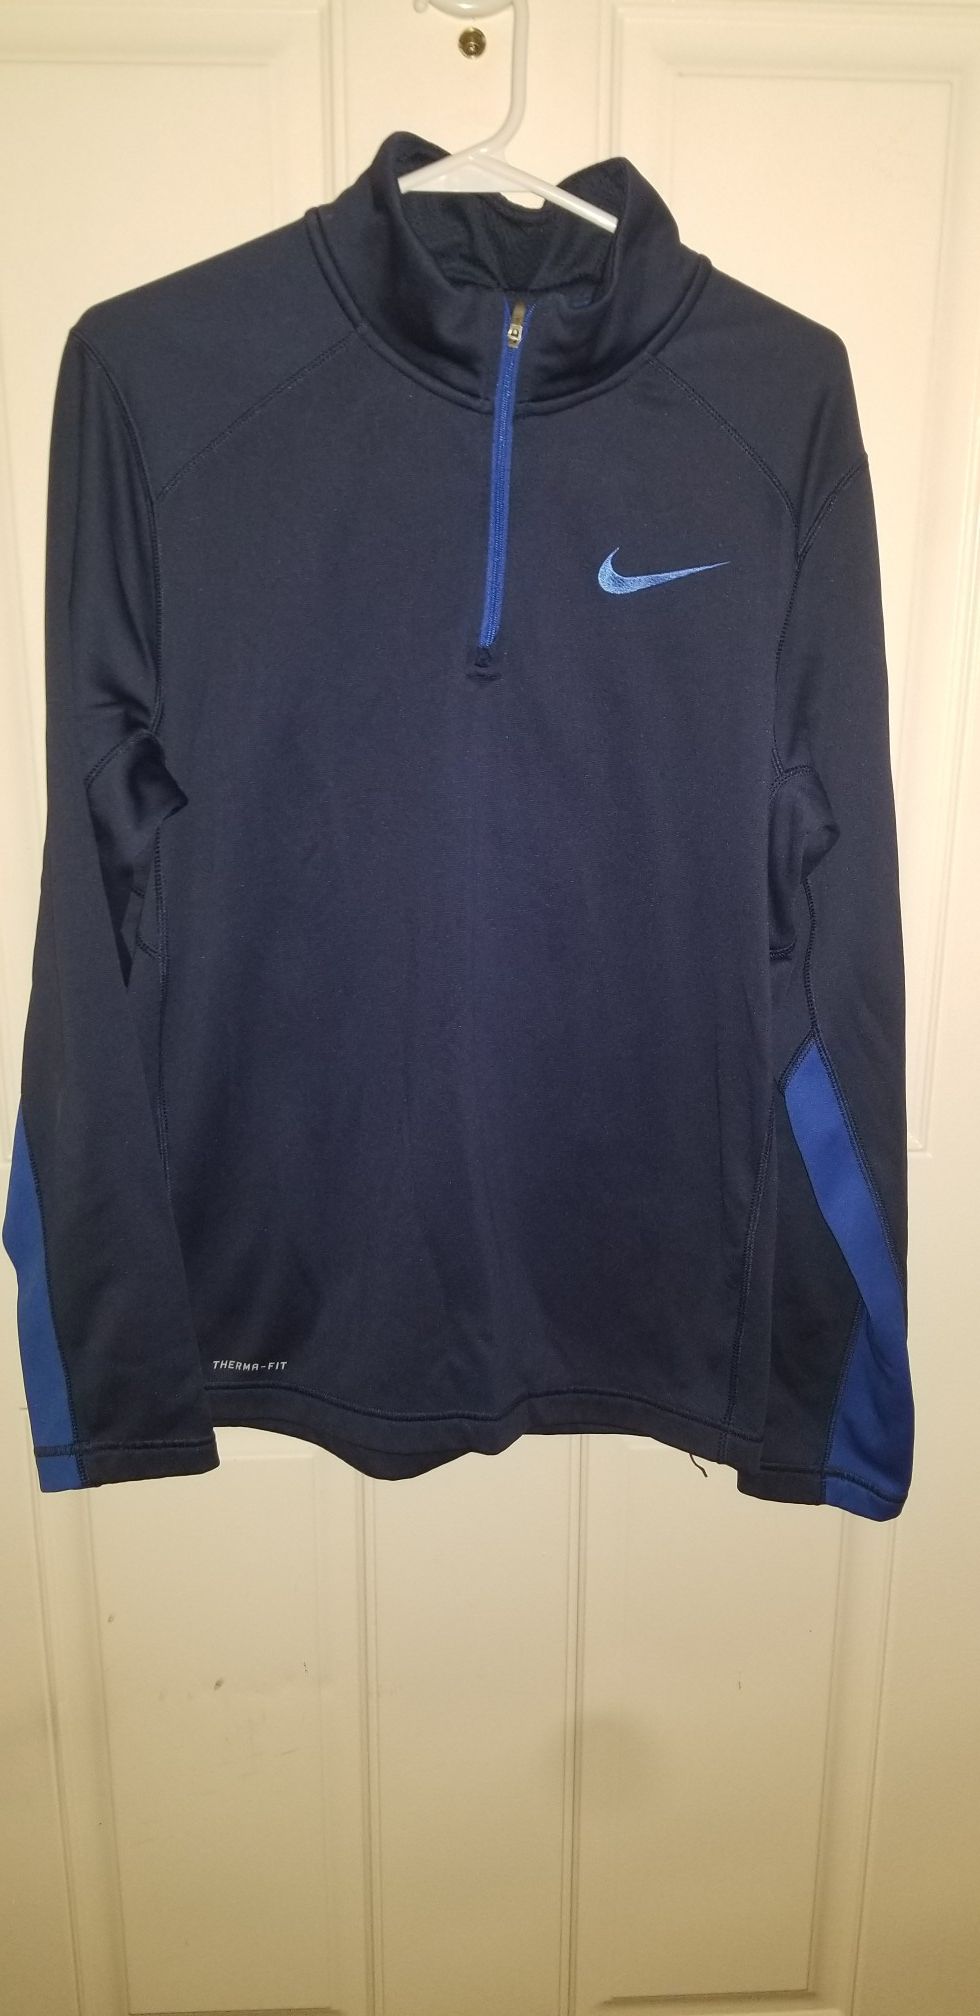 Nike Men's Size Small PULLOVER Excellent Condition NO RIPS NO STAINS Pick up in Taylor